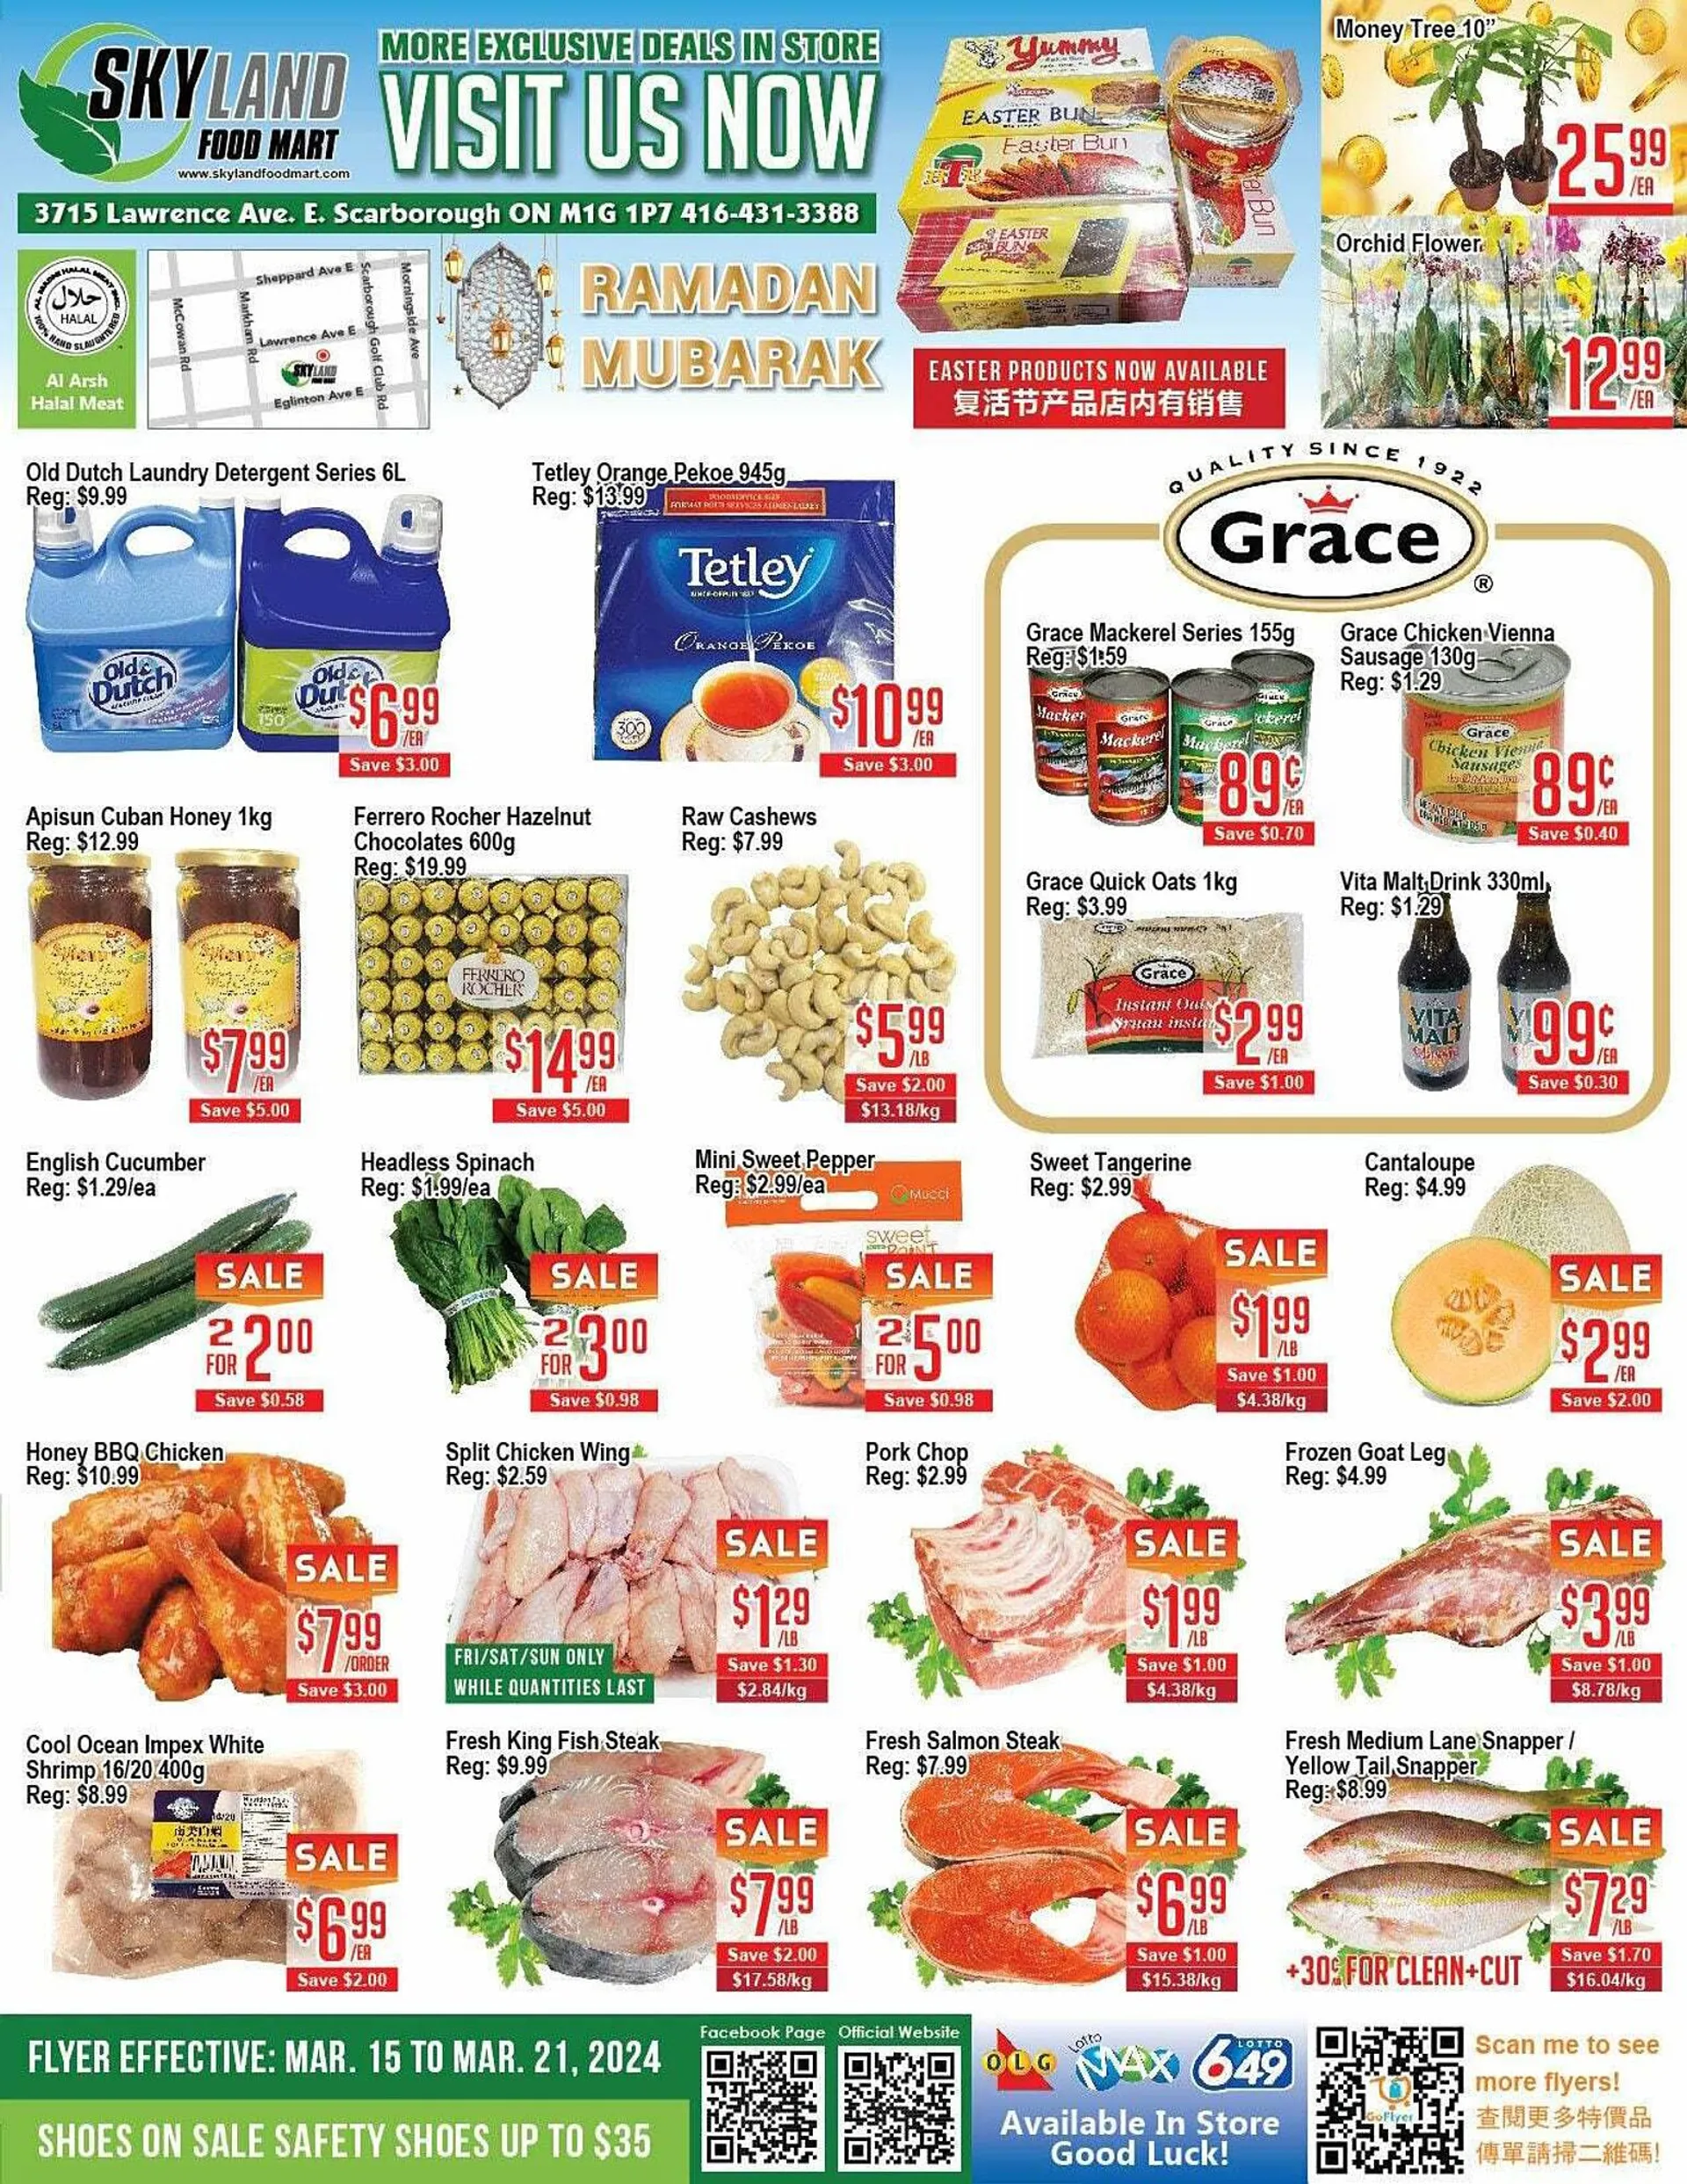 Skyland Foodmart flyer from March 15 to March 22 2024 - flyer page 1